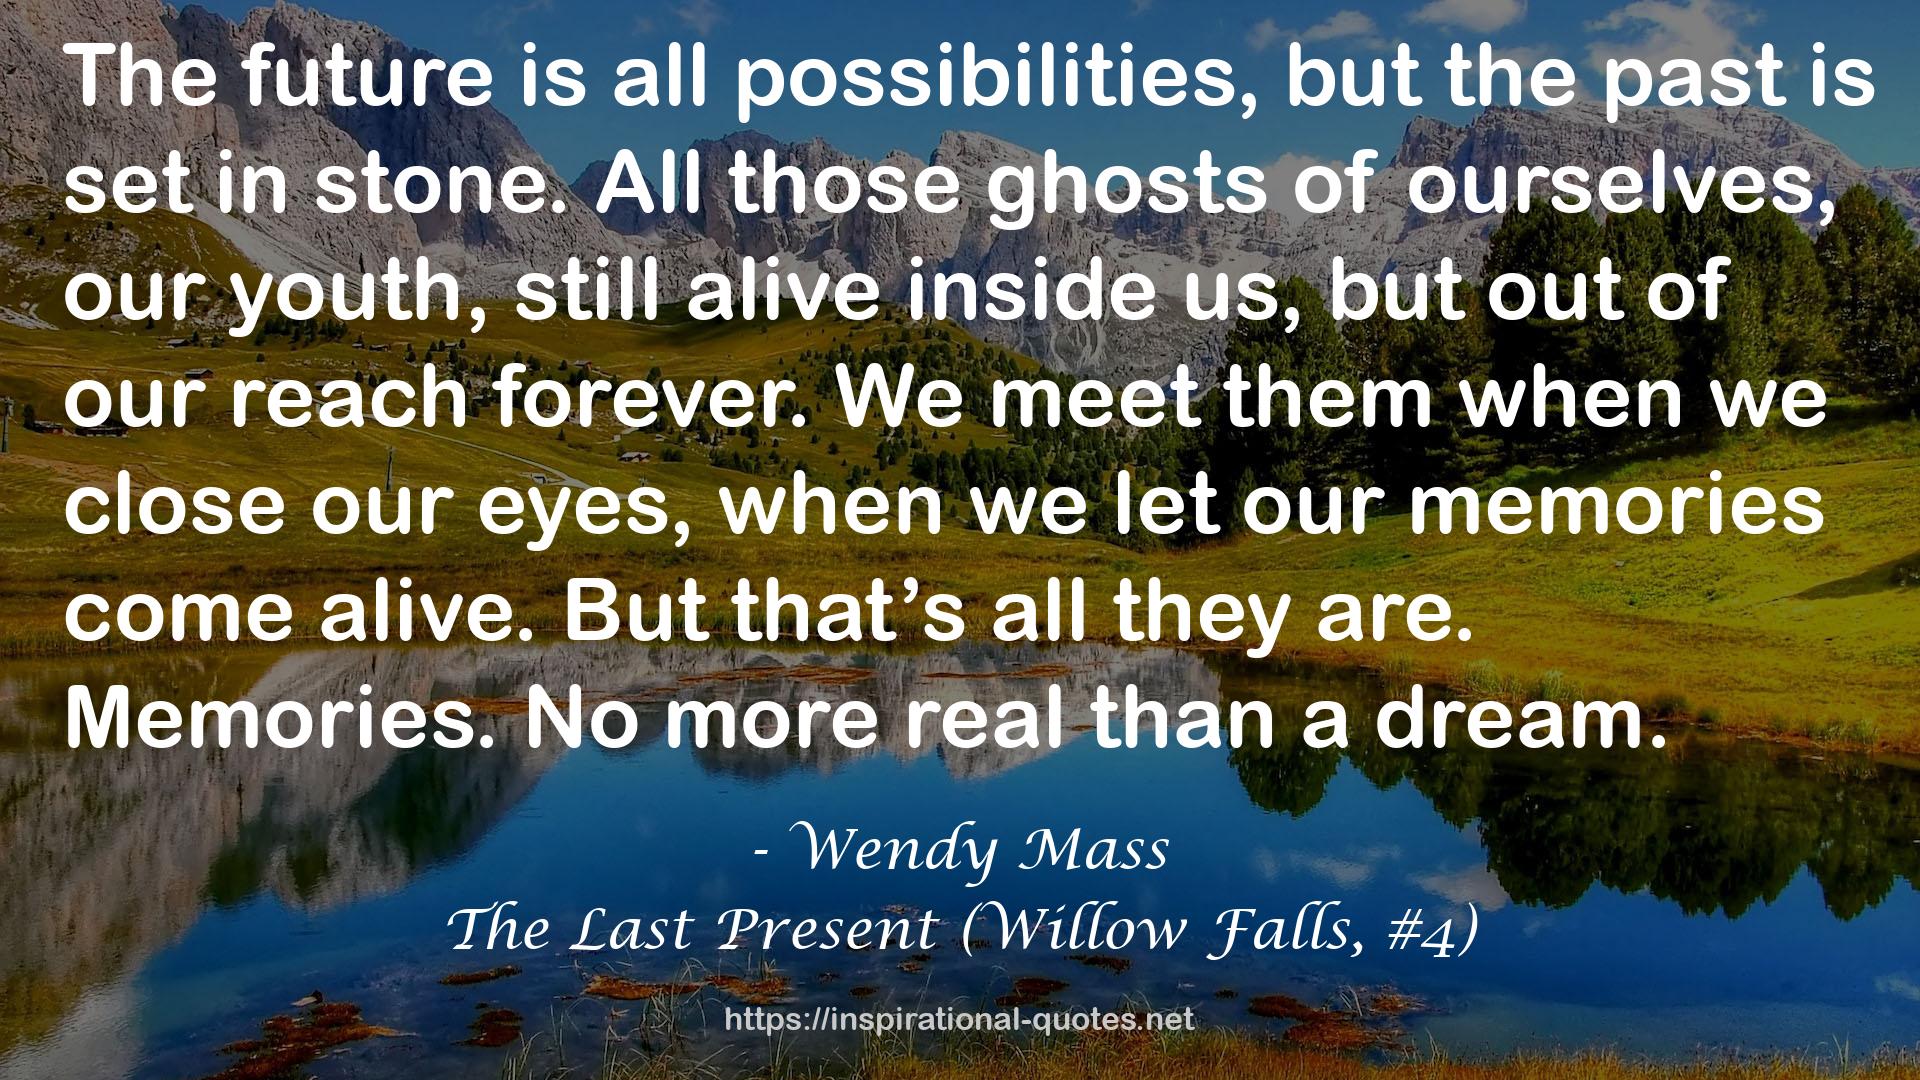 The Last Present (Willow Falls, #4) QUOTES